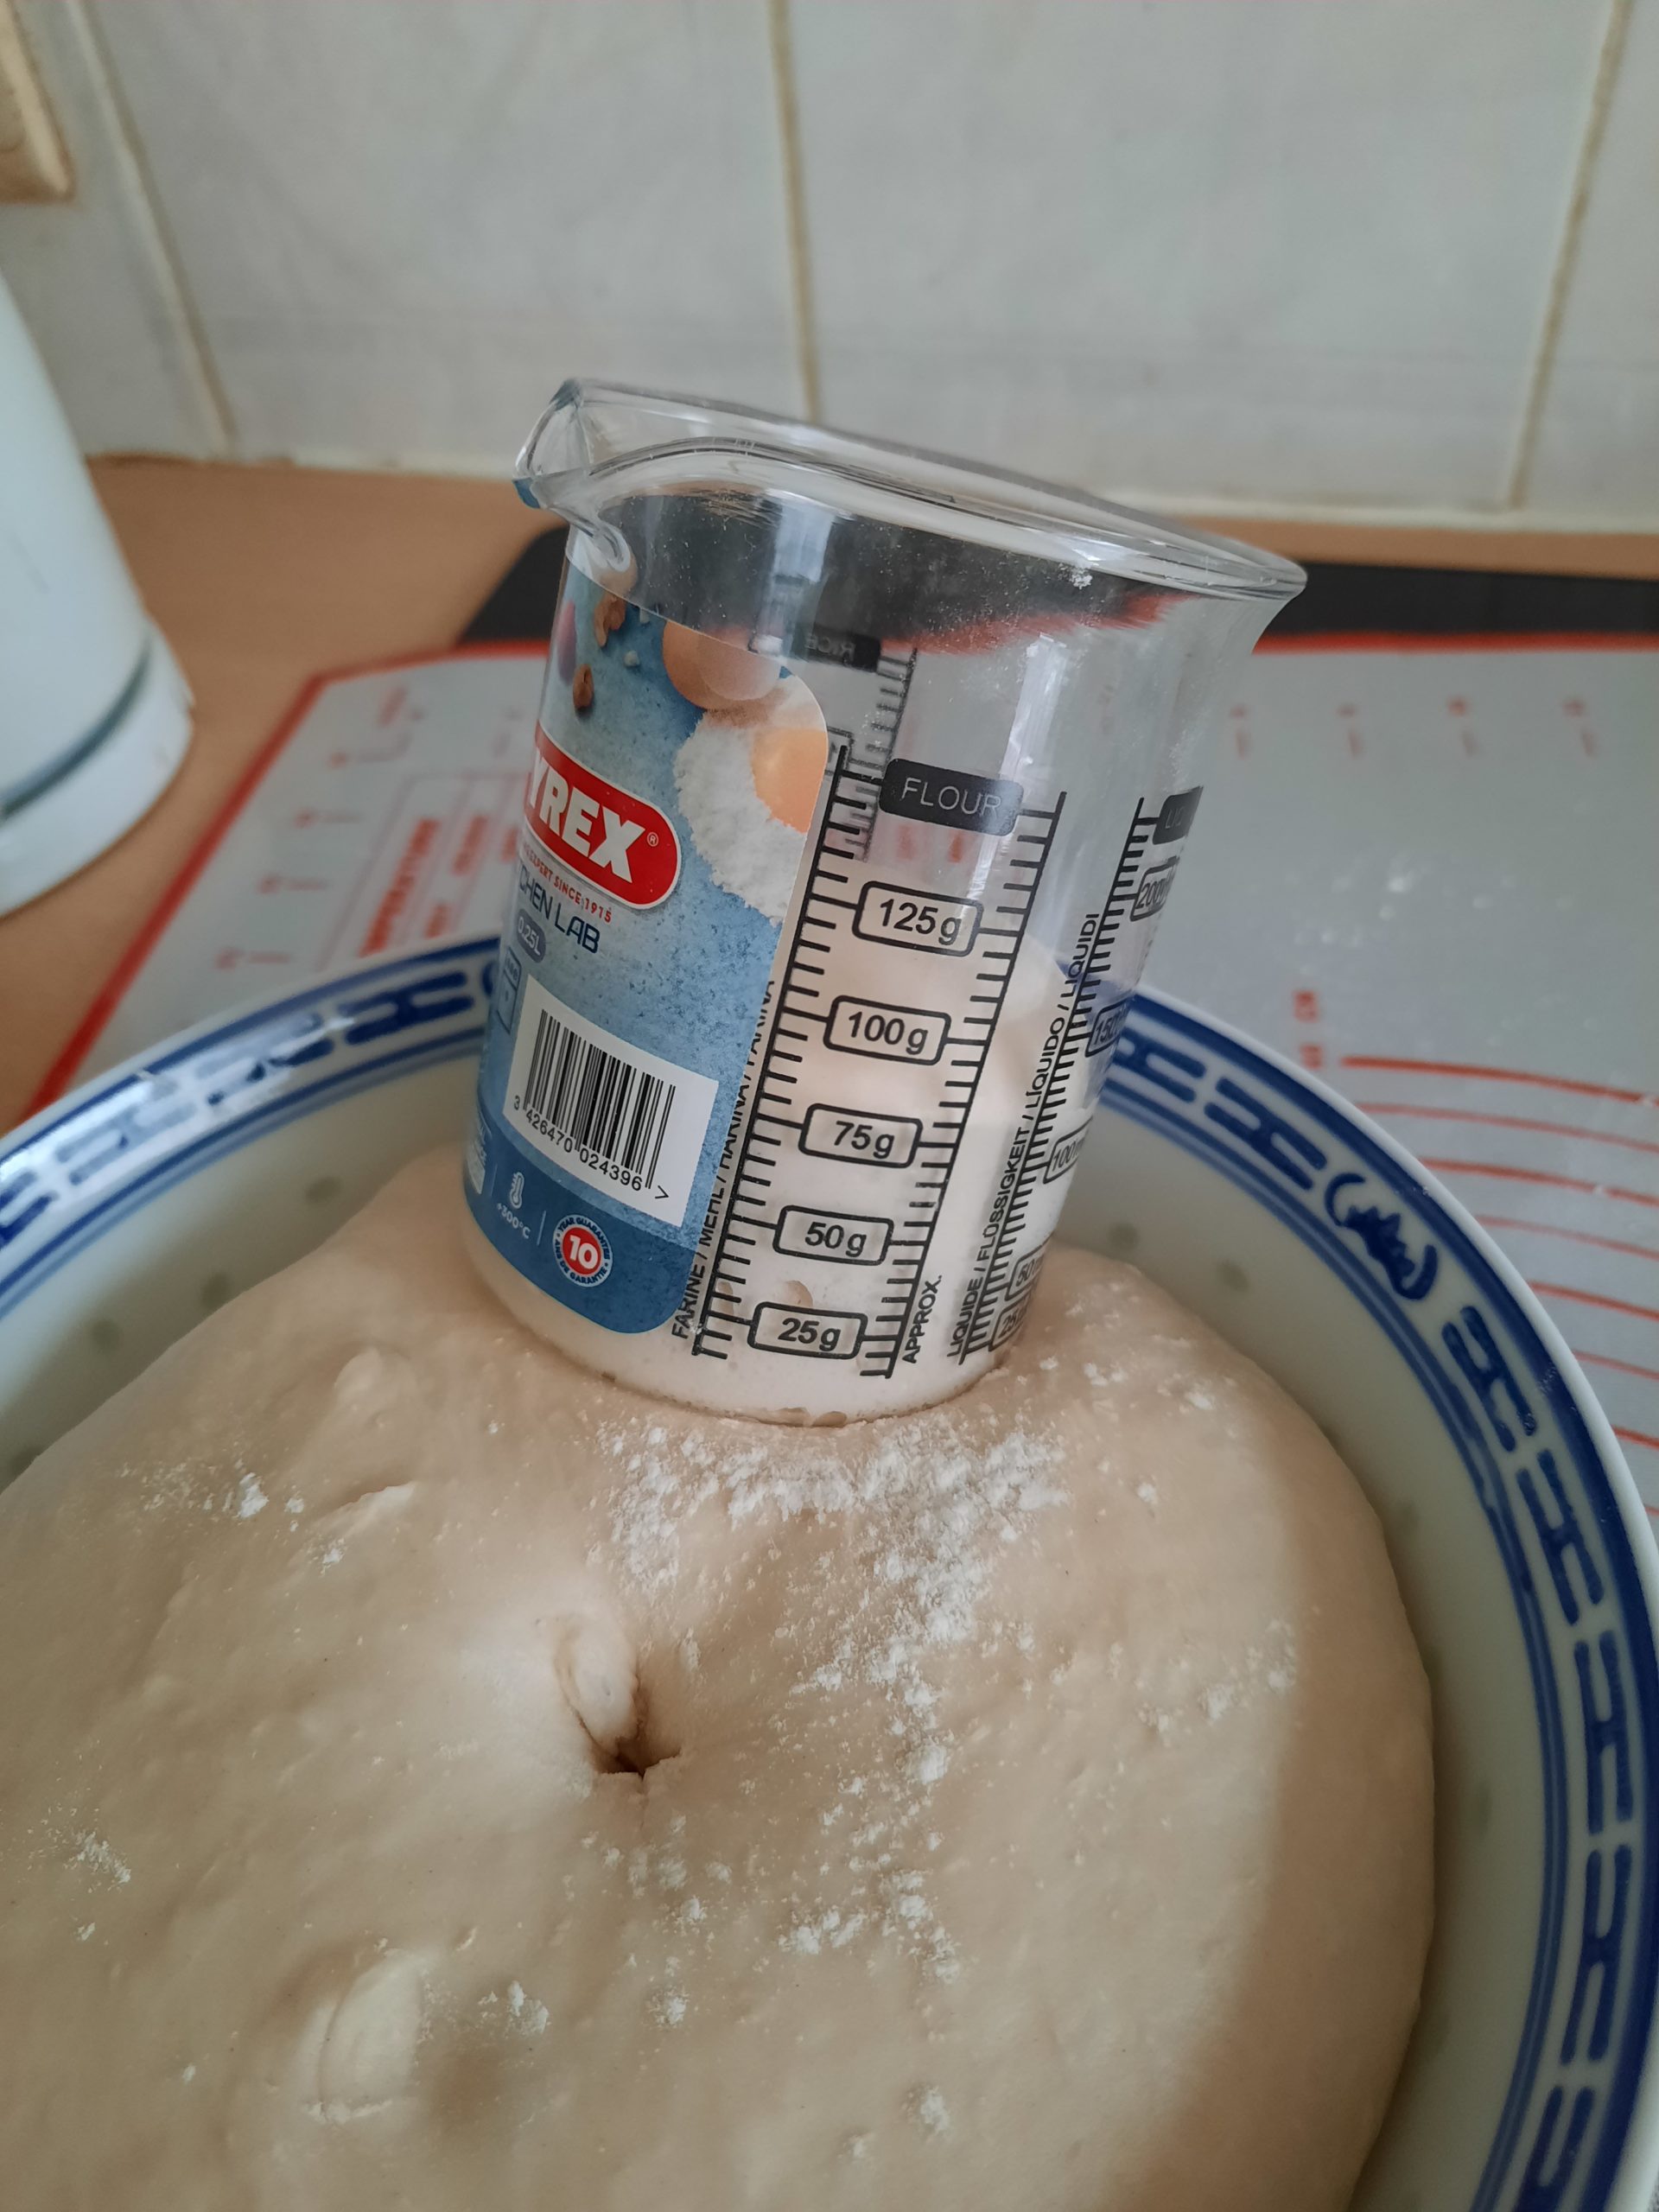 Cut out a small piece of dough, dust it with flour and put it into a measuring cup. After slightly compacting with a rolling pin, record the scale. ○ The fermentation speed of the dough will change with the environmental conditions, so use the scale of the measuring cup to judge whether the dough has expanded to the ideal size